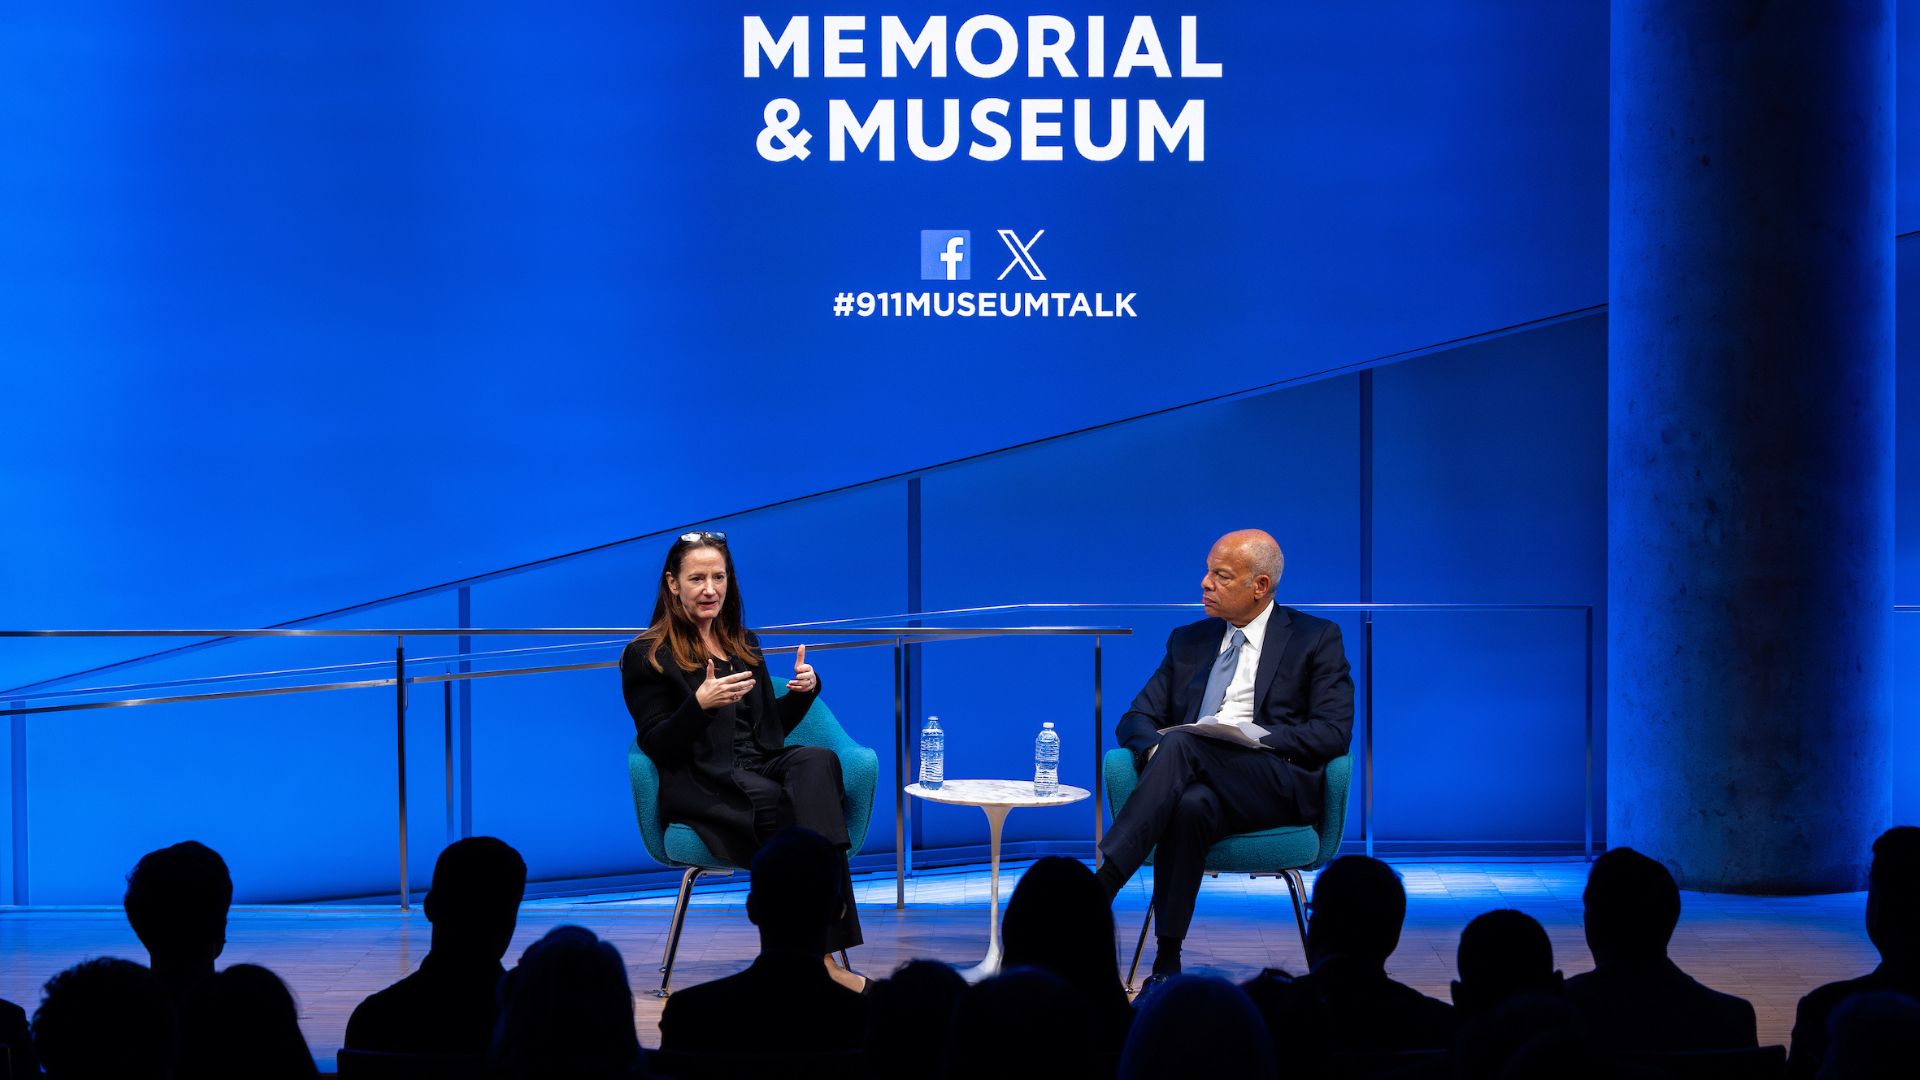 A woman (left) and a man sit on stage against a blue backdrop with a portion of the 9/11 Memorial & Museum logo visible. Both are wearing dark suits and the back of audience members' heads are visible in front.